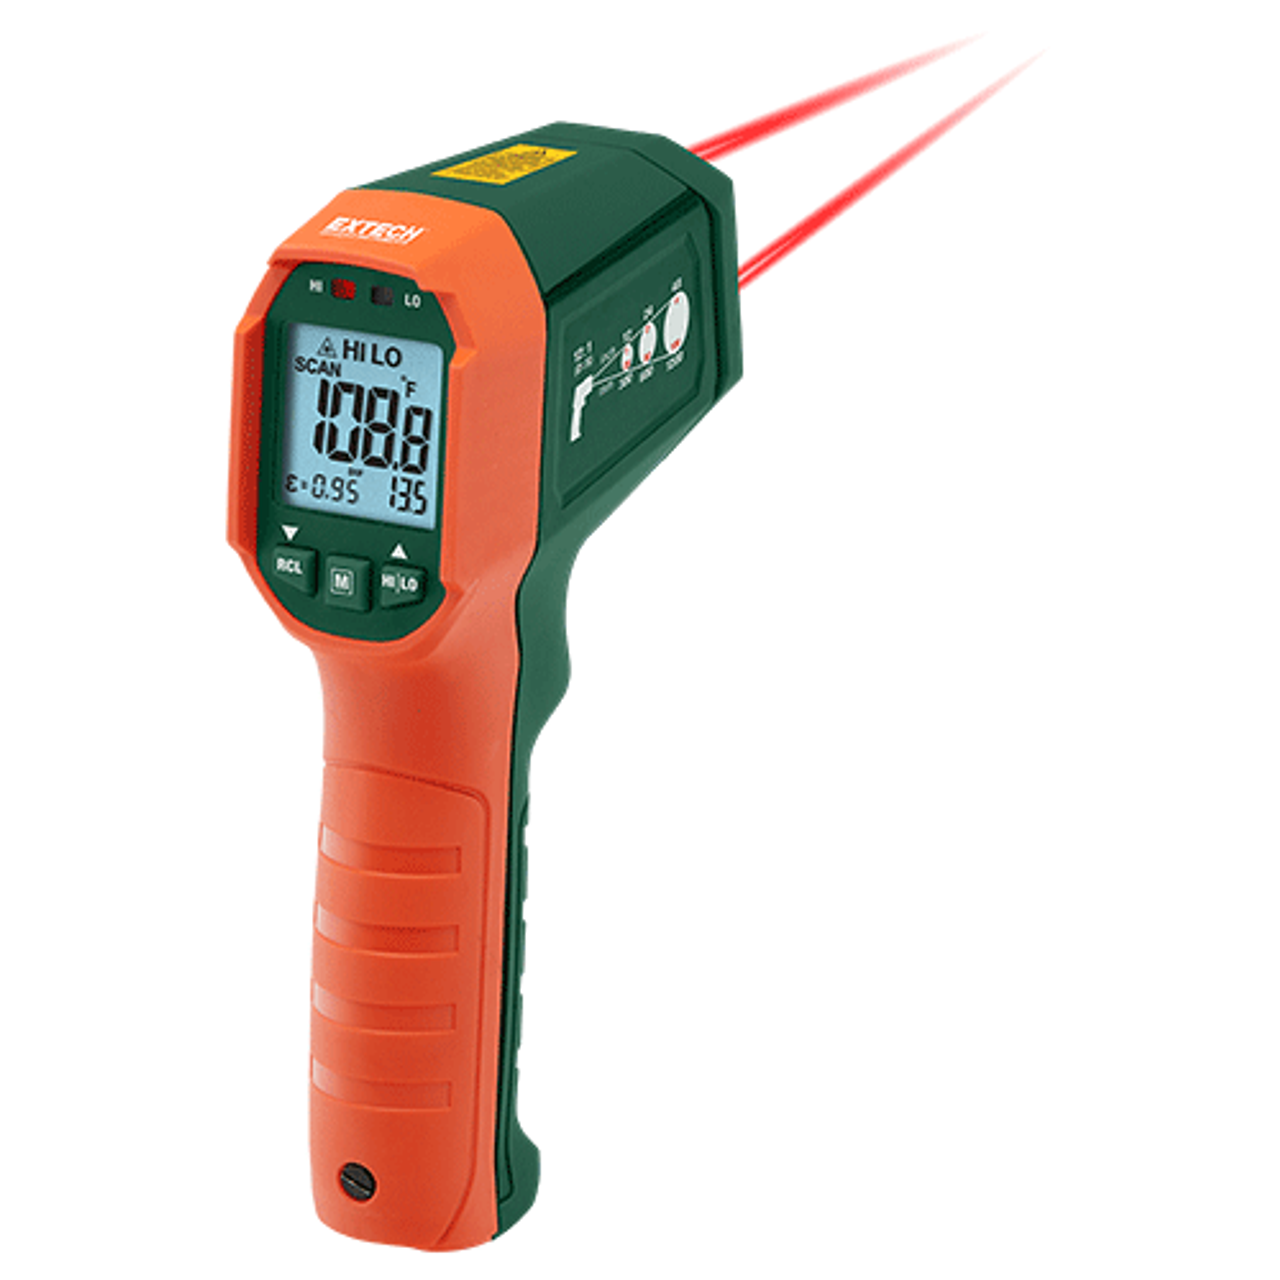 Dual Laser Targeting Infrared Thermometer